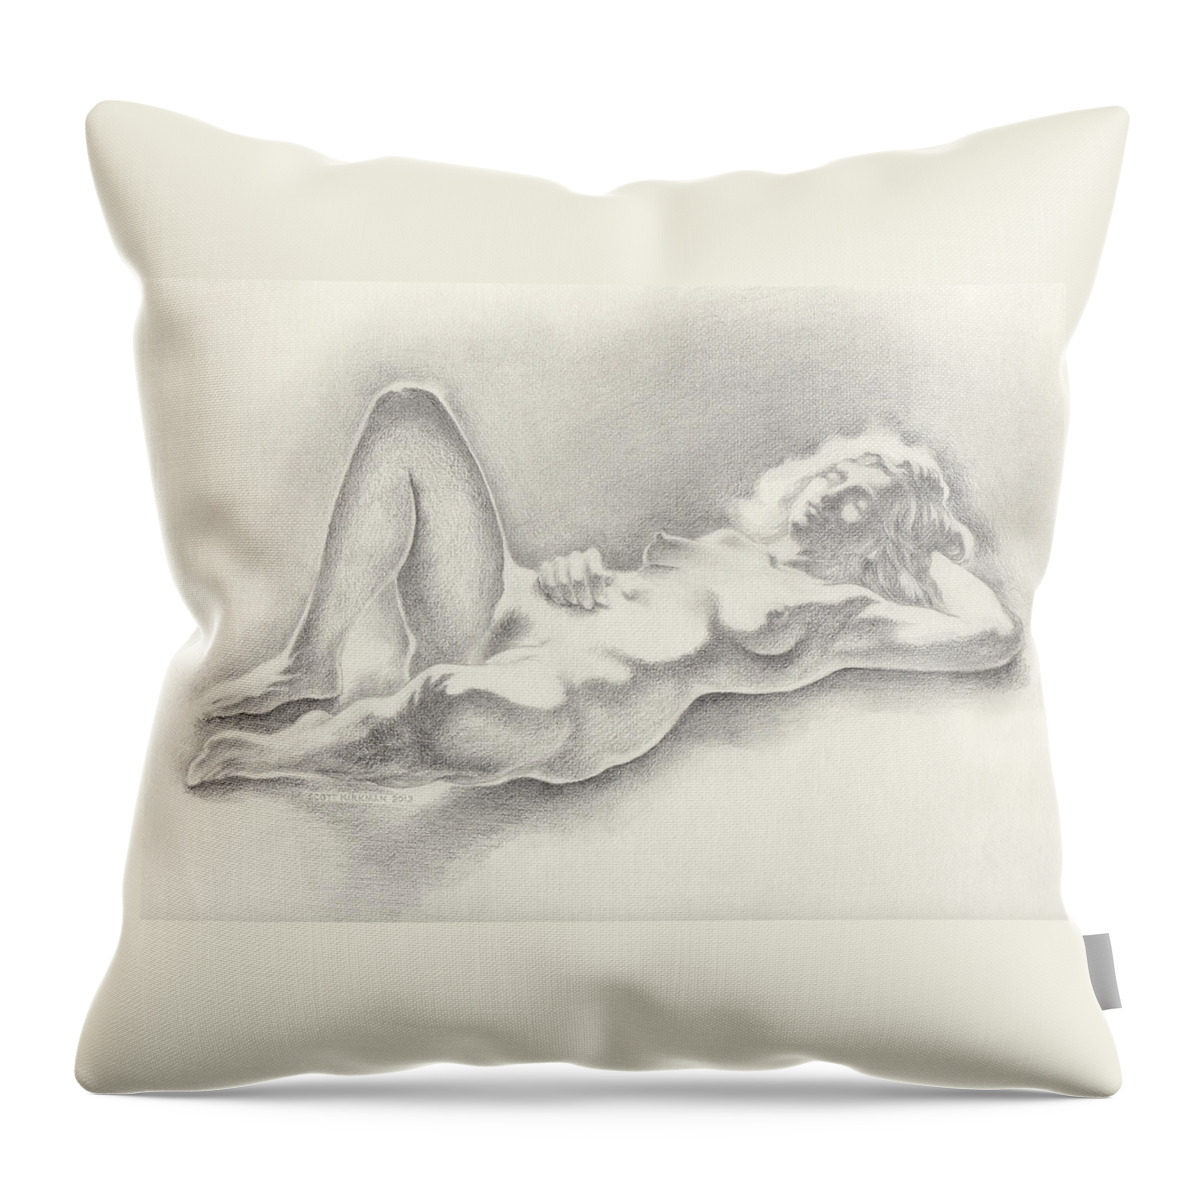 Female Nude Throw Pillow featuring the drawing Shimmering Shadows by Scott Kirkman